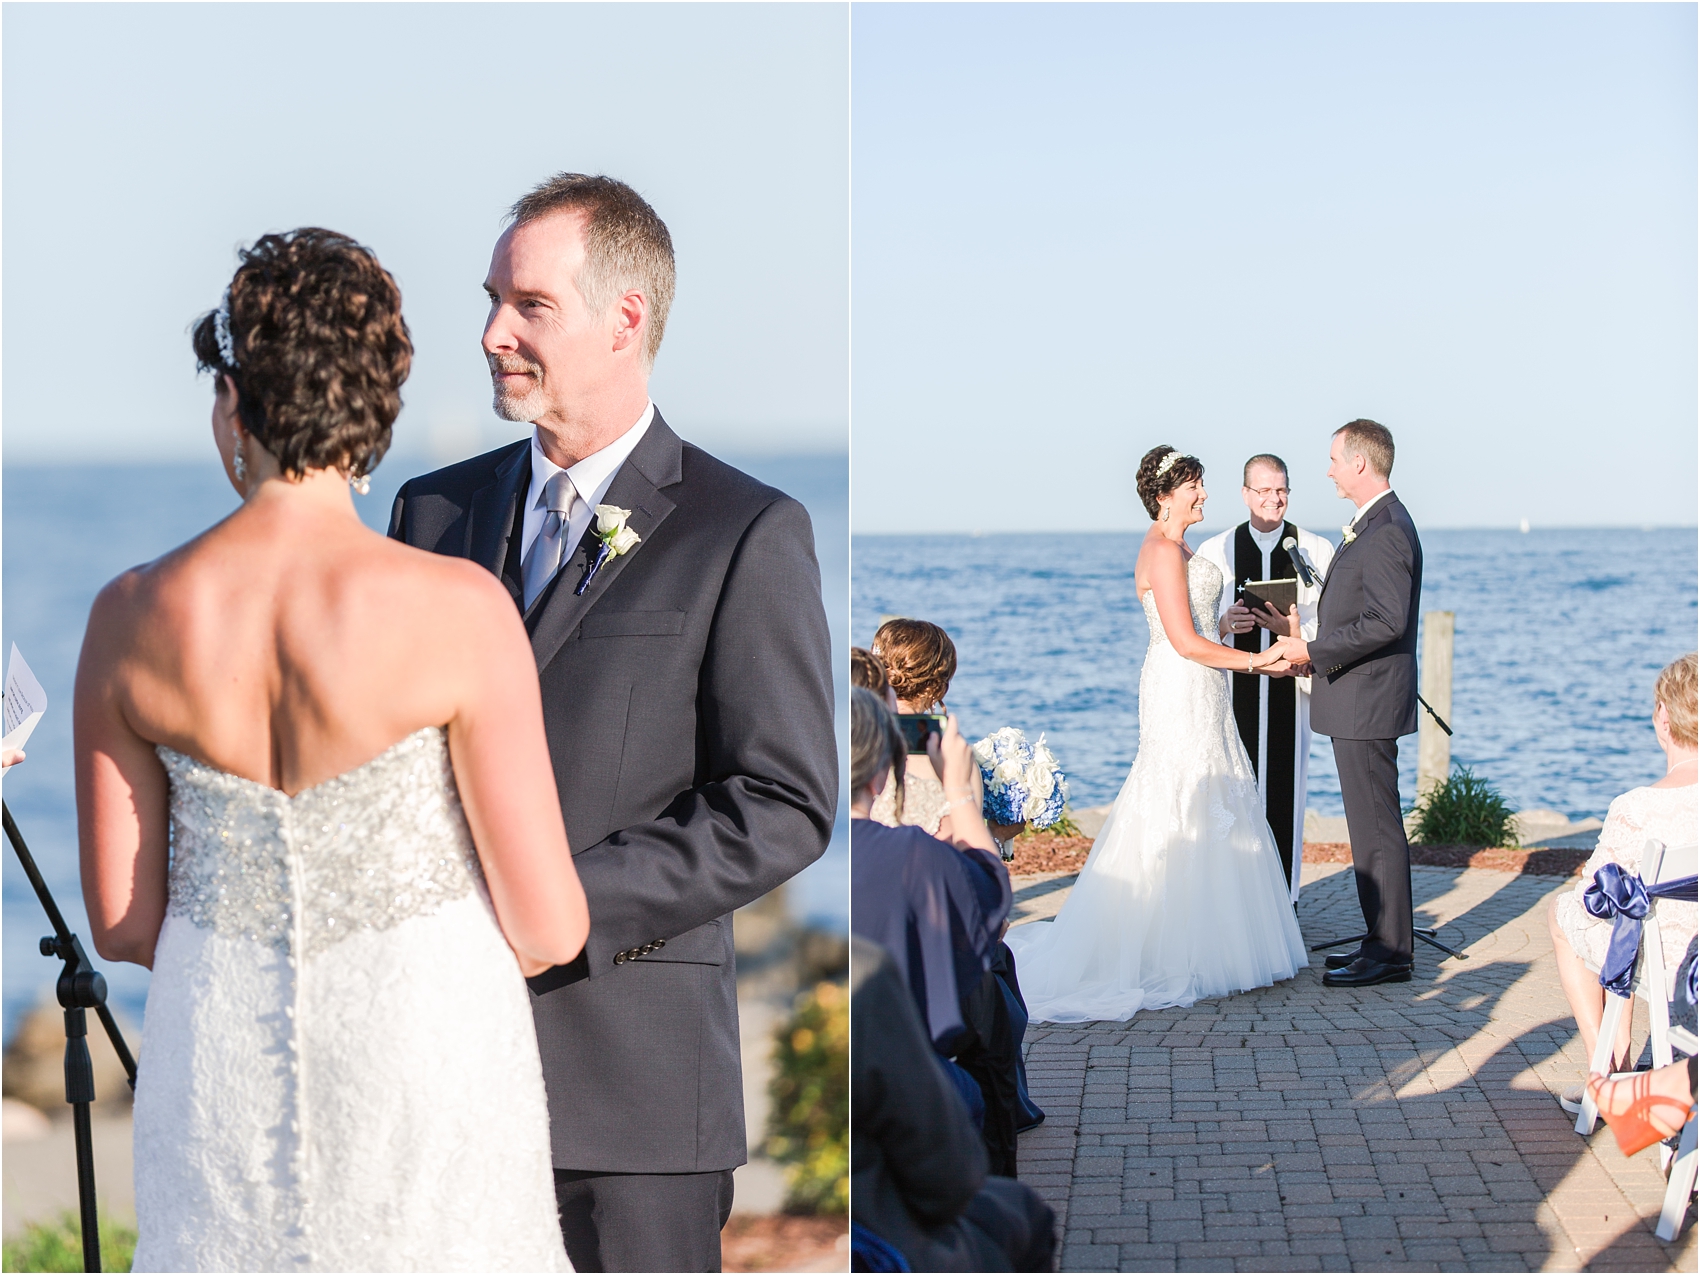 classic-natuical-inspired-wedding-photos-on-infinity-ovation-yacht-in-st-clair-shores-mi-by-courtney-carolyn-photography_0048.jpg